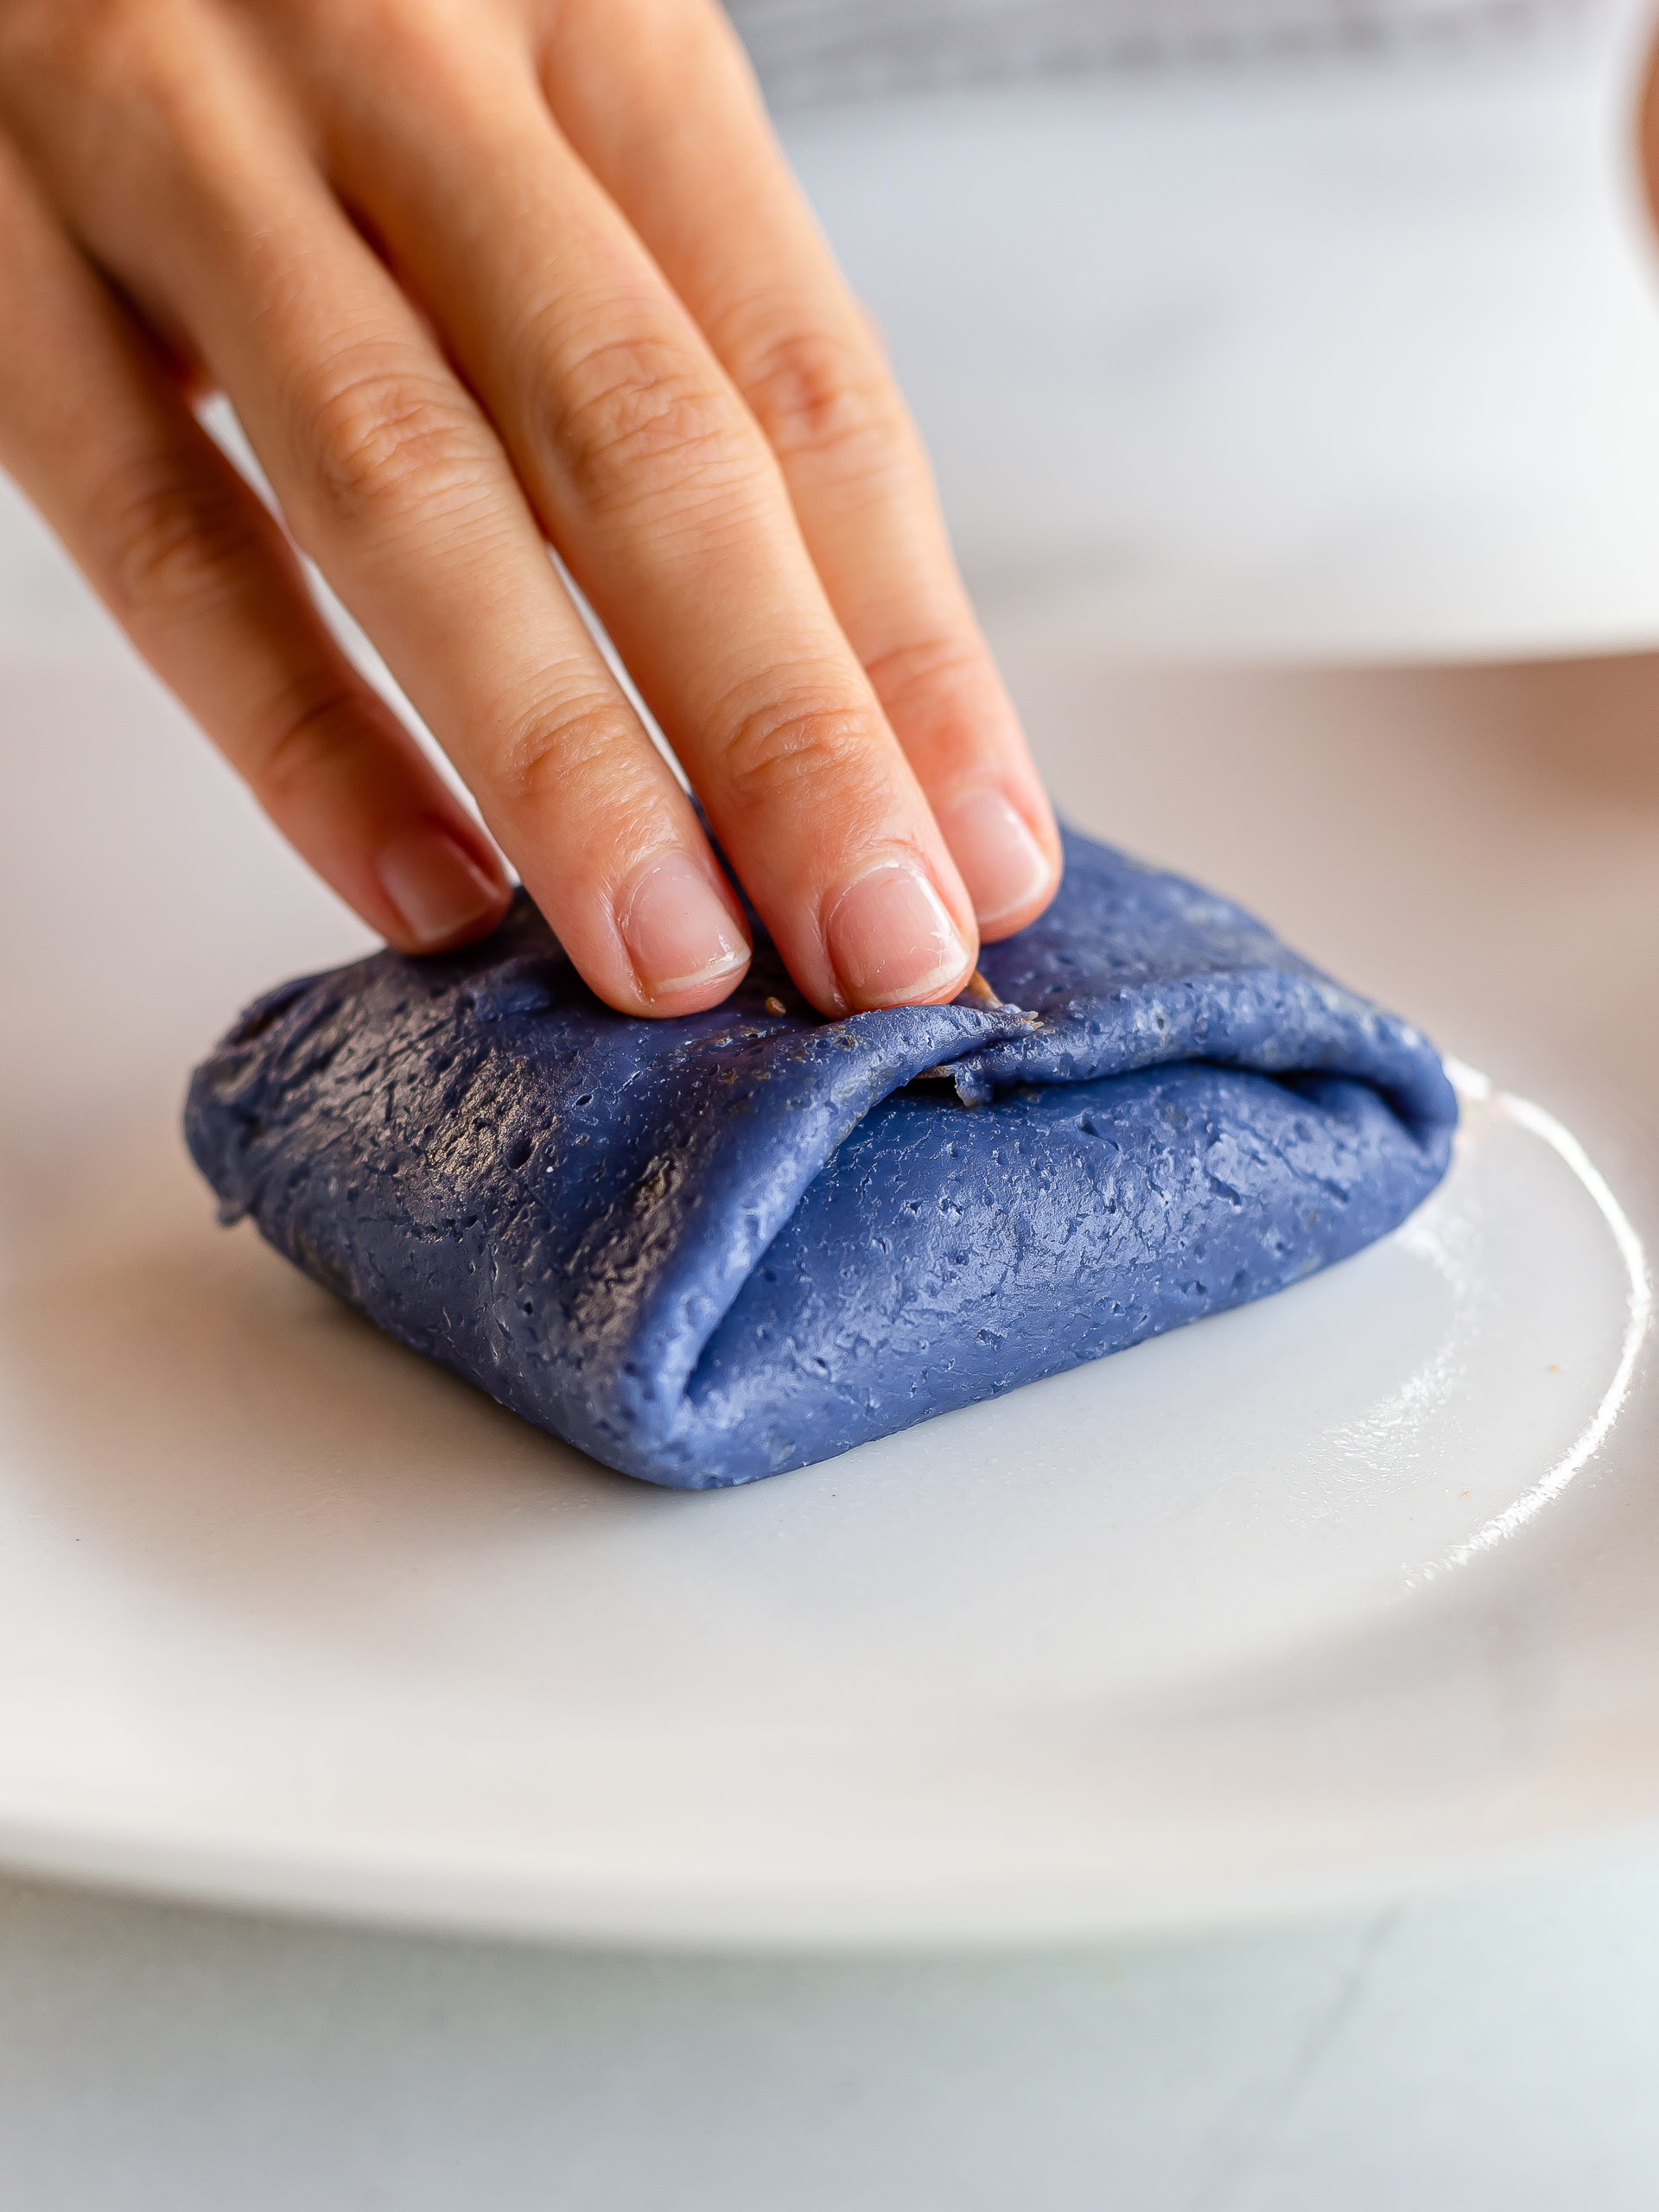 blue crepe folded into a pillow-shape with durian filling